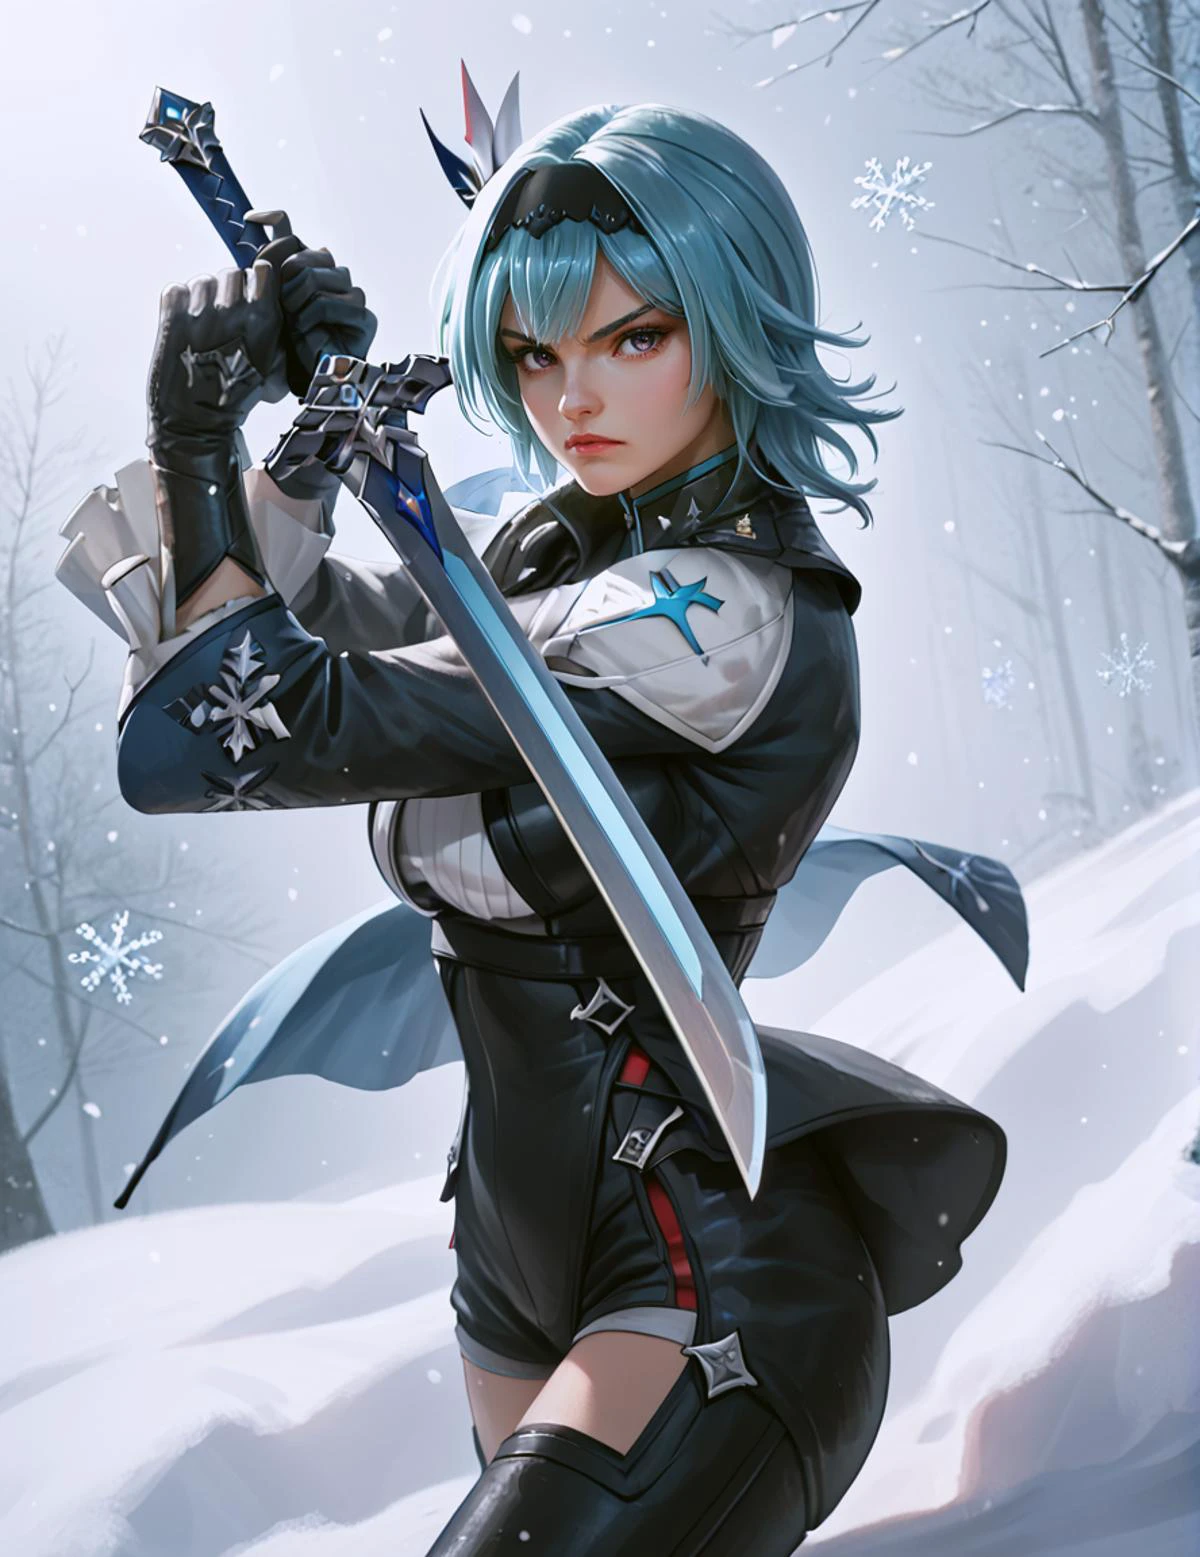 score_9, score_8_up, score_7_up, 
low guard sword parry stance, 
1girl,eula,serious, focused,holding sword,
heroic  fantasy background, snow, snowflakes,
dynamic,
